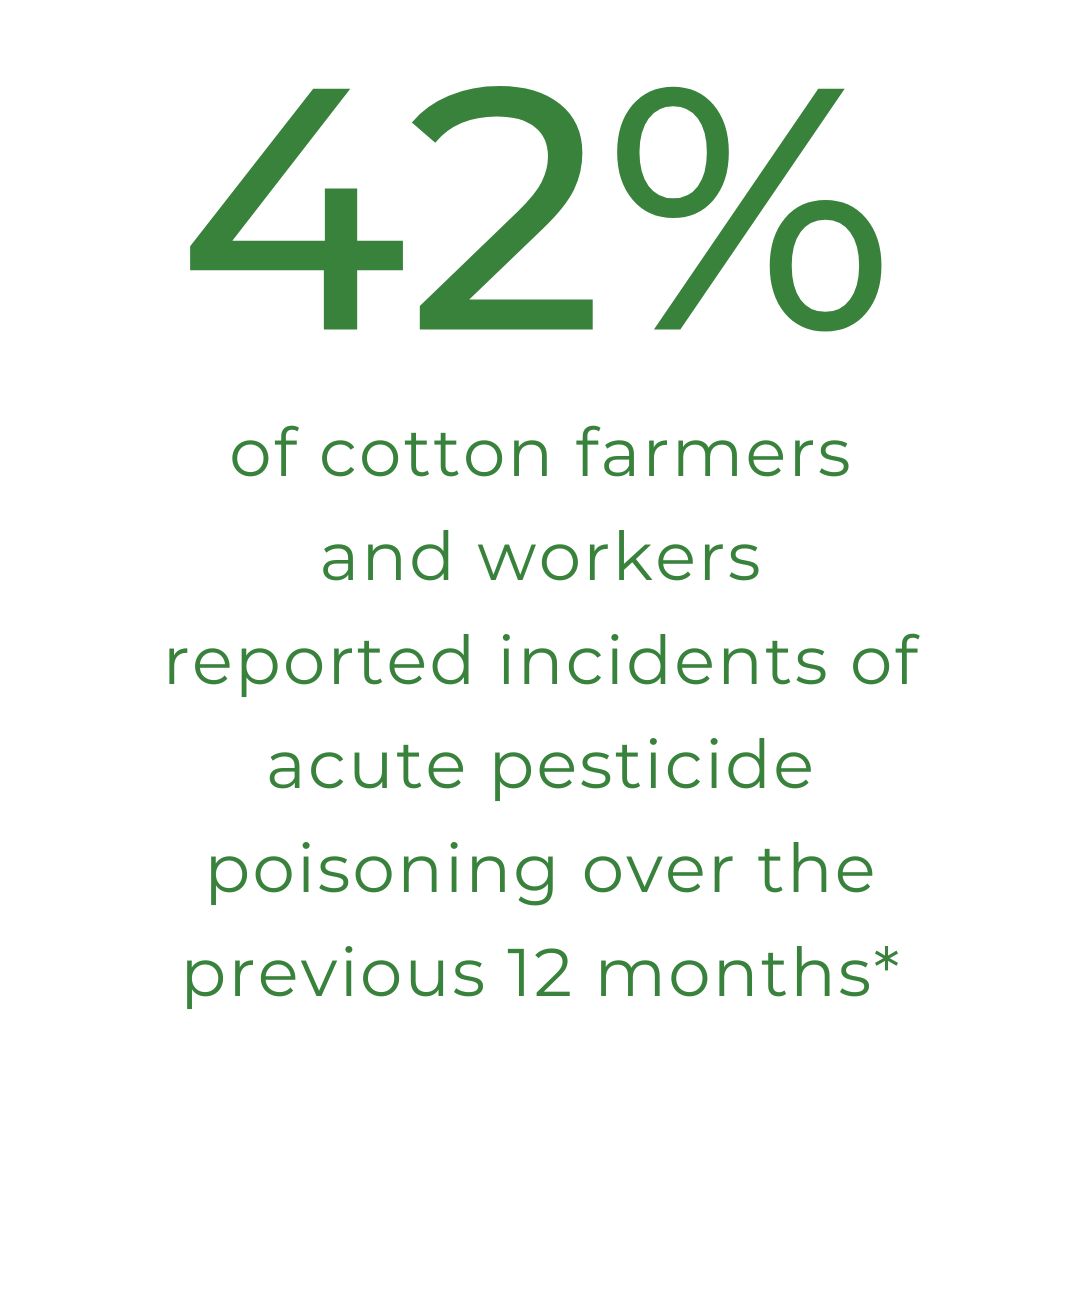 42% of cotton farmers reported incidents of acute pesticide poisoning